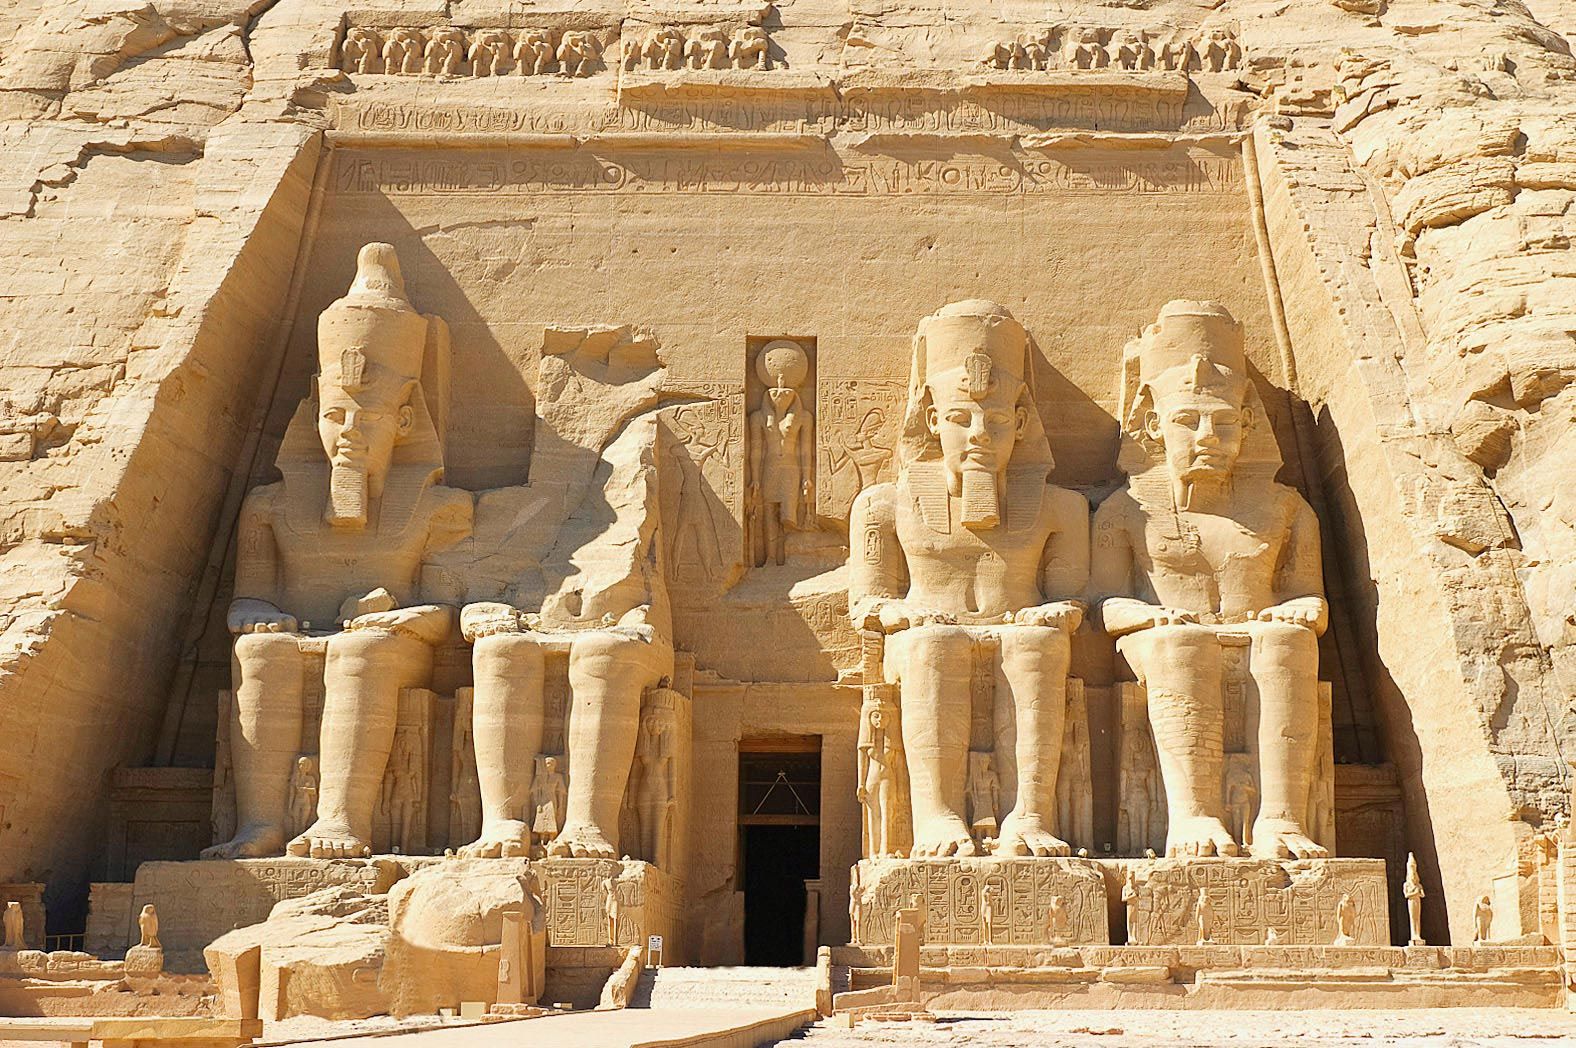 The Abu Simbel temple honors Ramses II and his queen Nefertari (meaning “beautiful companion”).